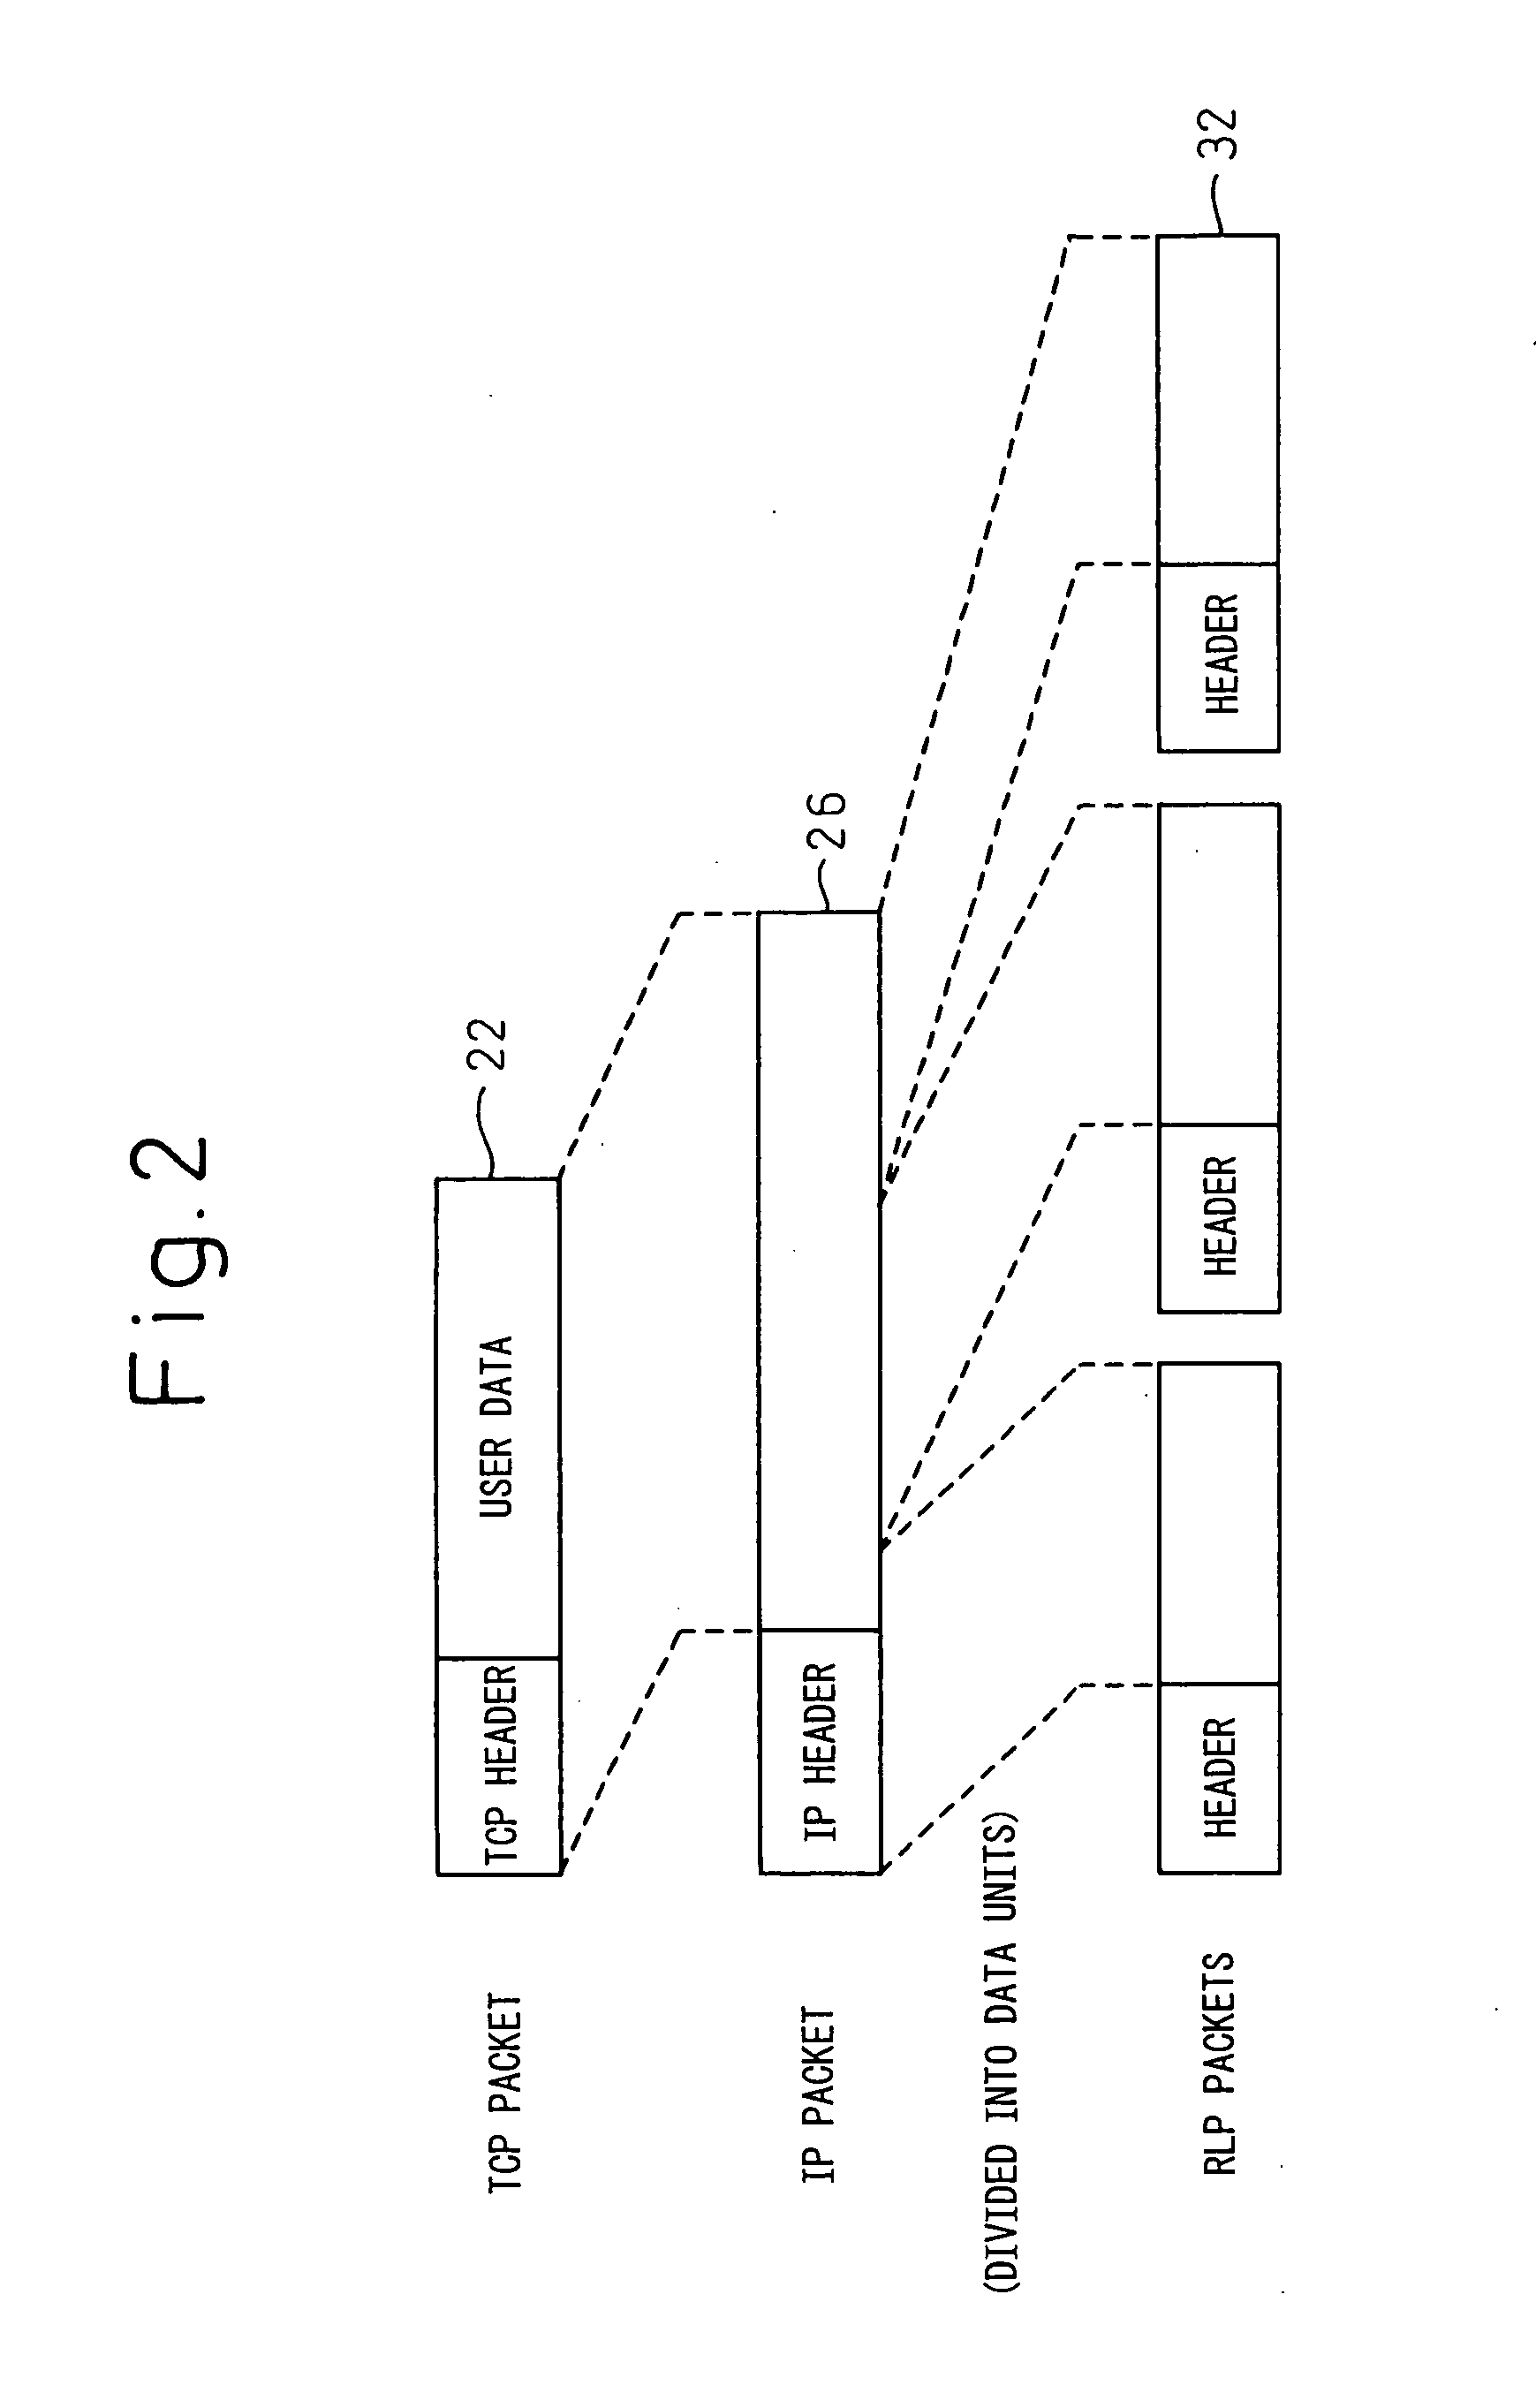 Mobile terminal and radio access point in radio access system